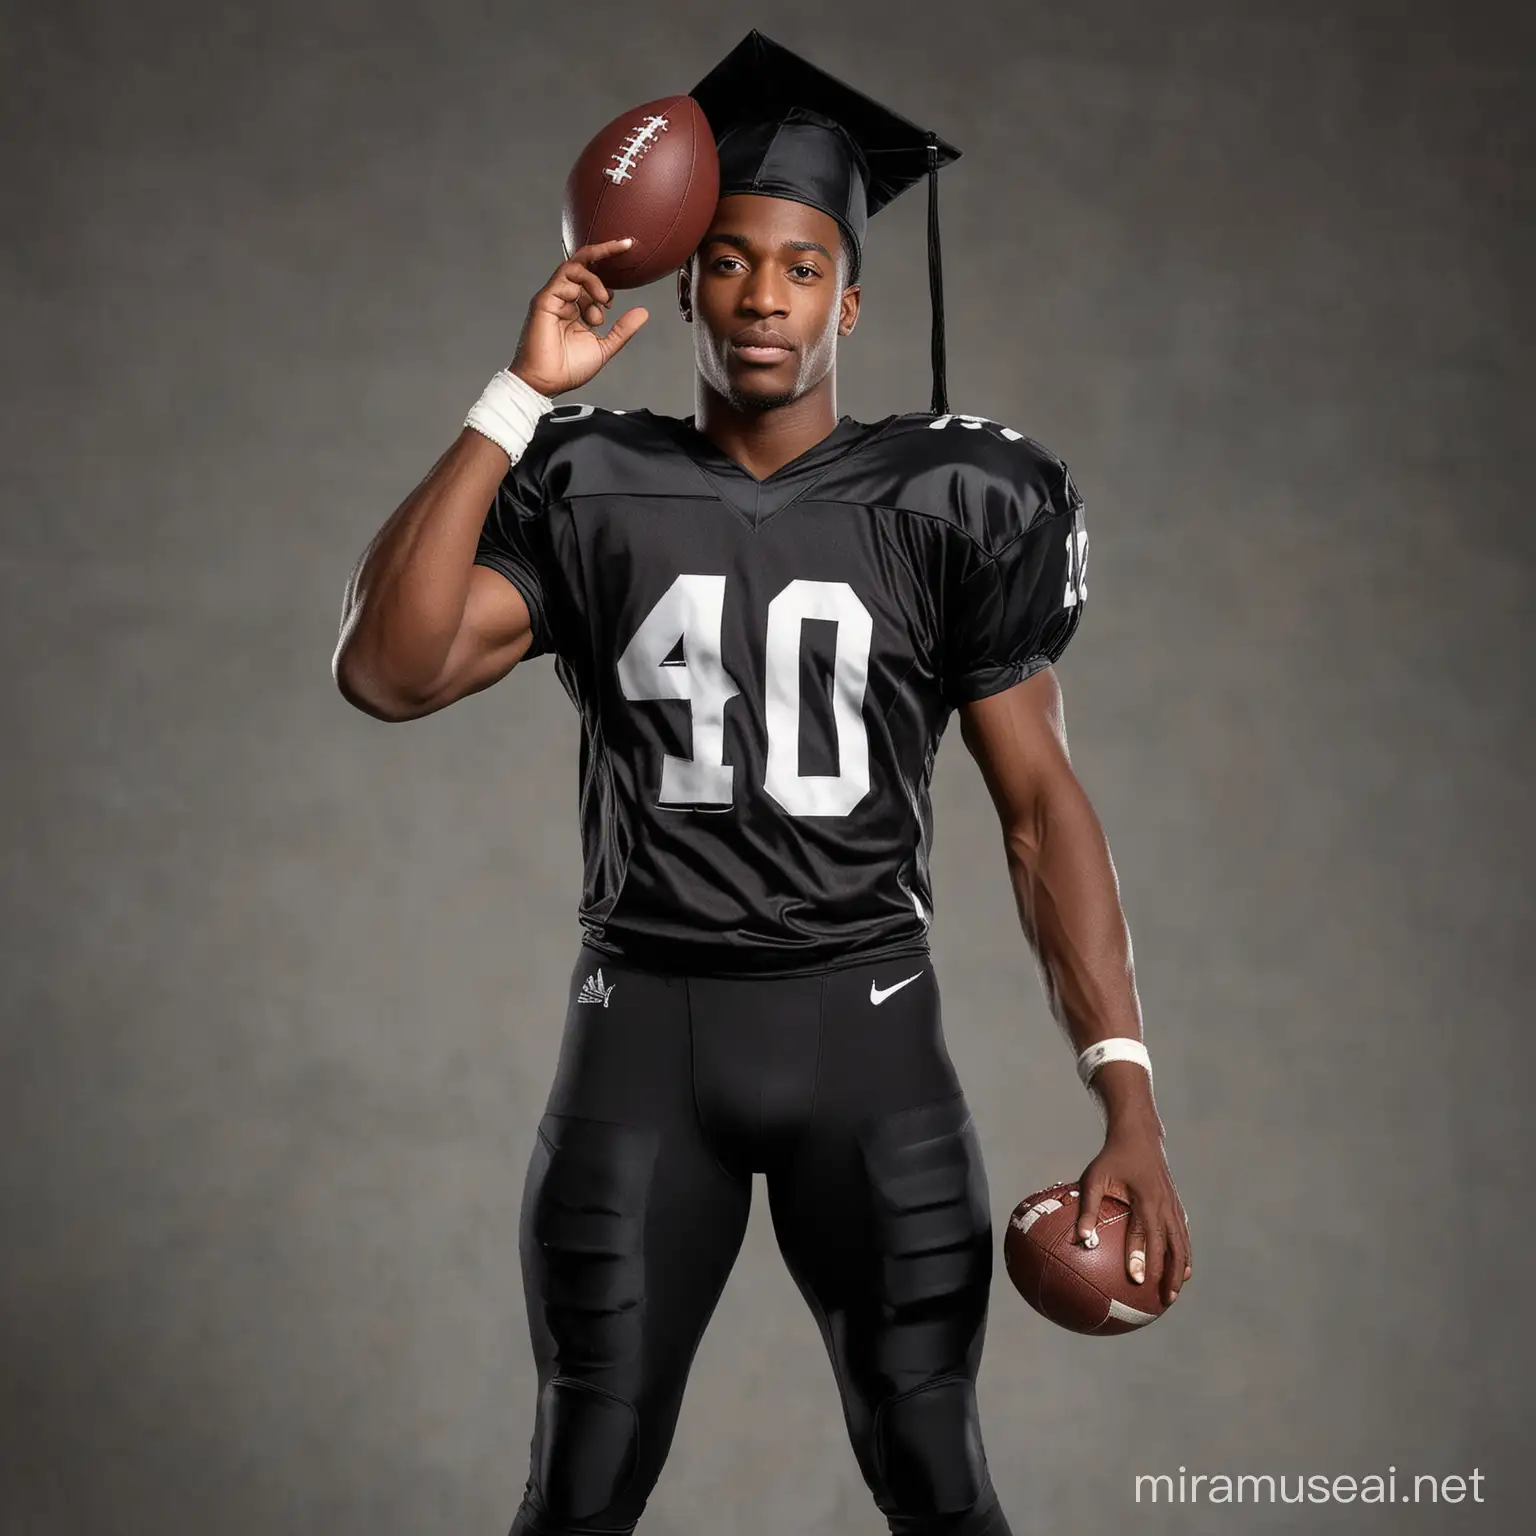 Create an image of a muscular, african american football player in a black football jersey. He has a black graduation cap on his head. He is holding a football in a hand.